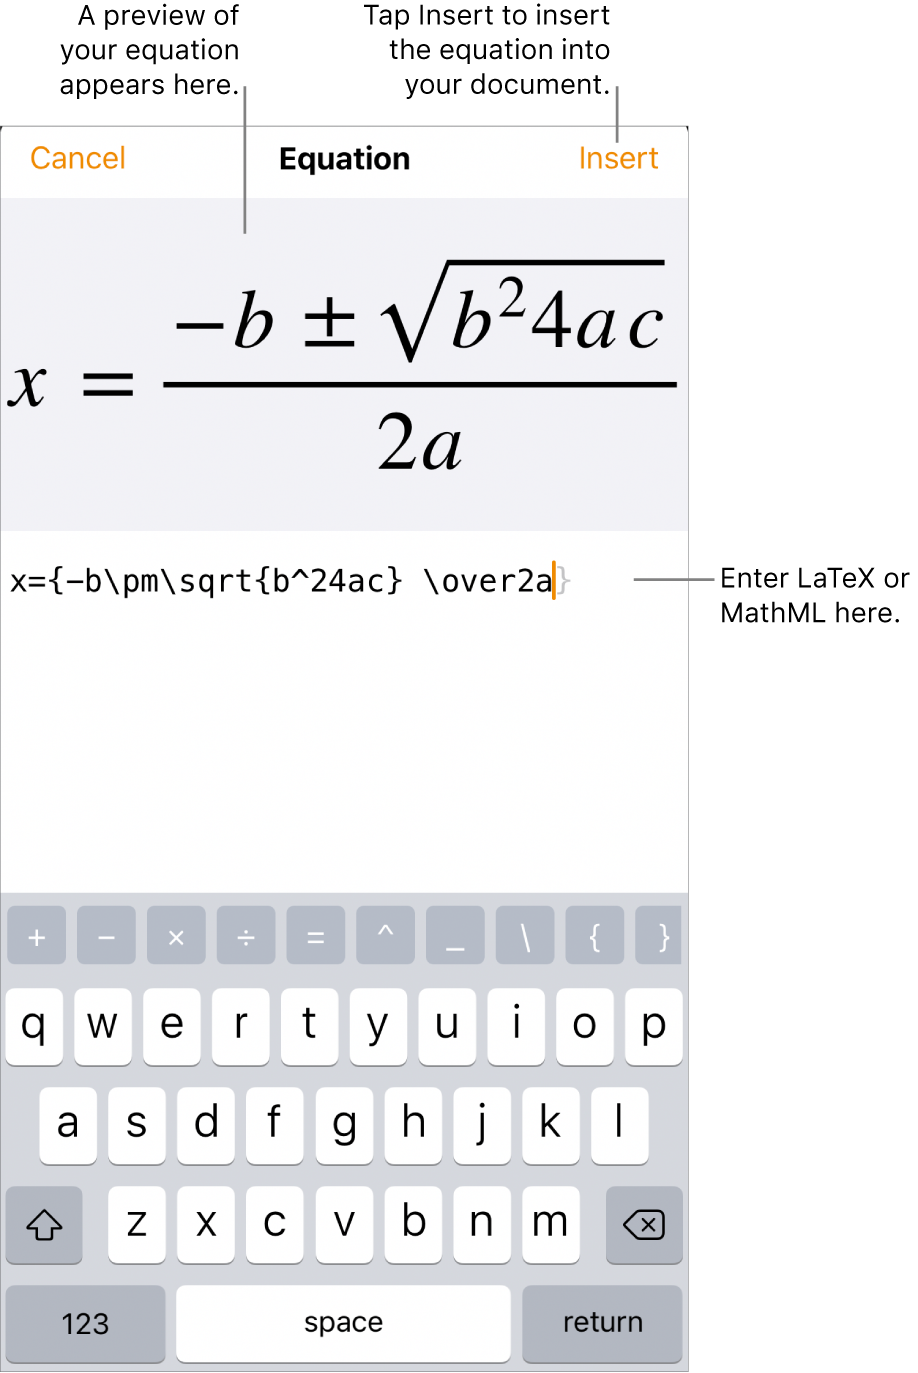 The Equation dialogue, showing the quadratic formula written using LaTeX commands, and a preview of the formula above.